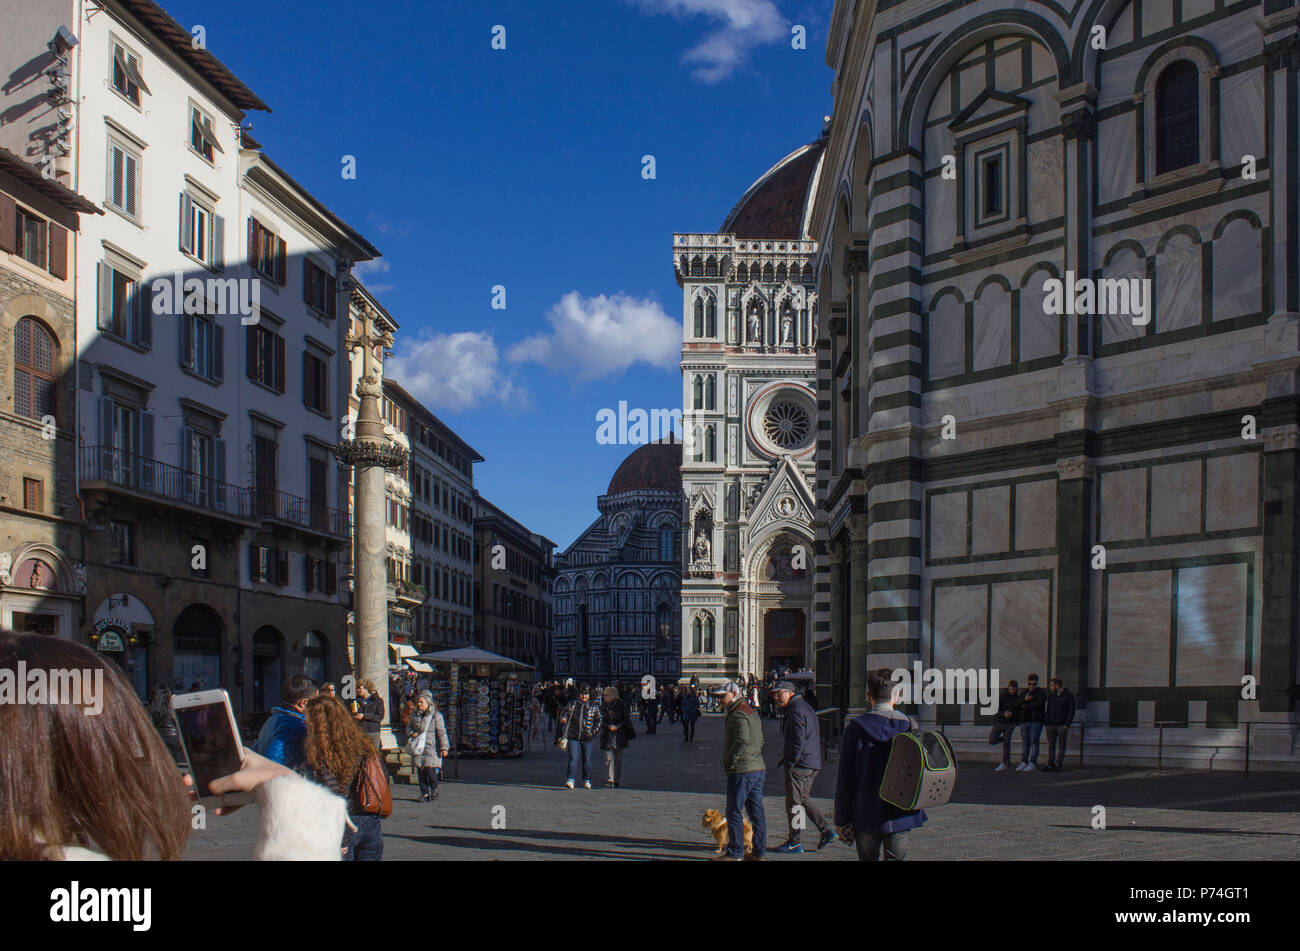 FLORENCE, ITALY - NOVEMBER 22 2015: People in Duomo's square in Florence, Italy Stock Photo